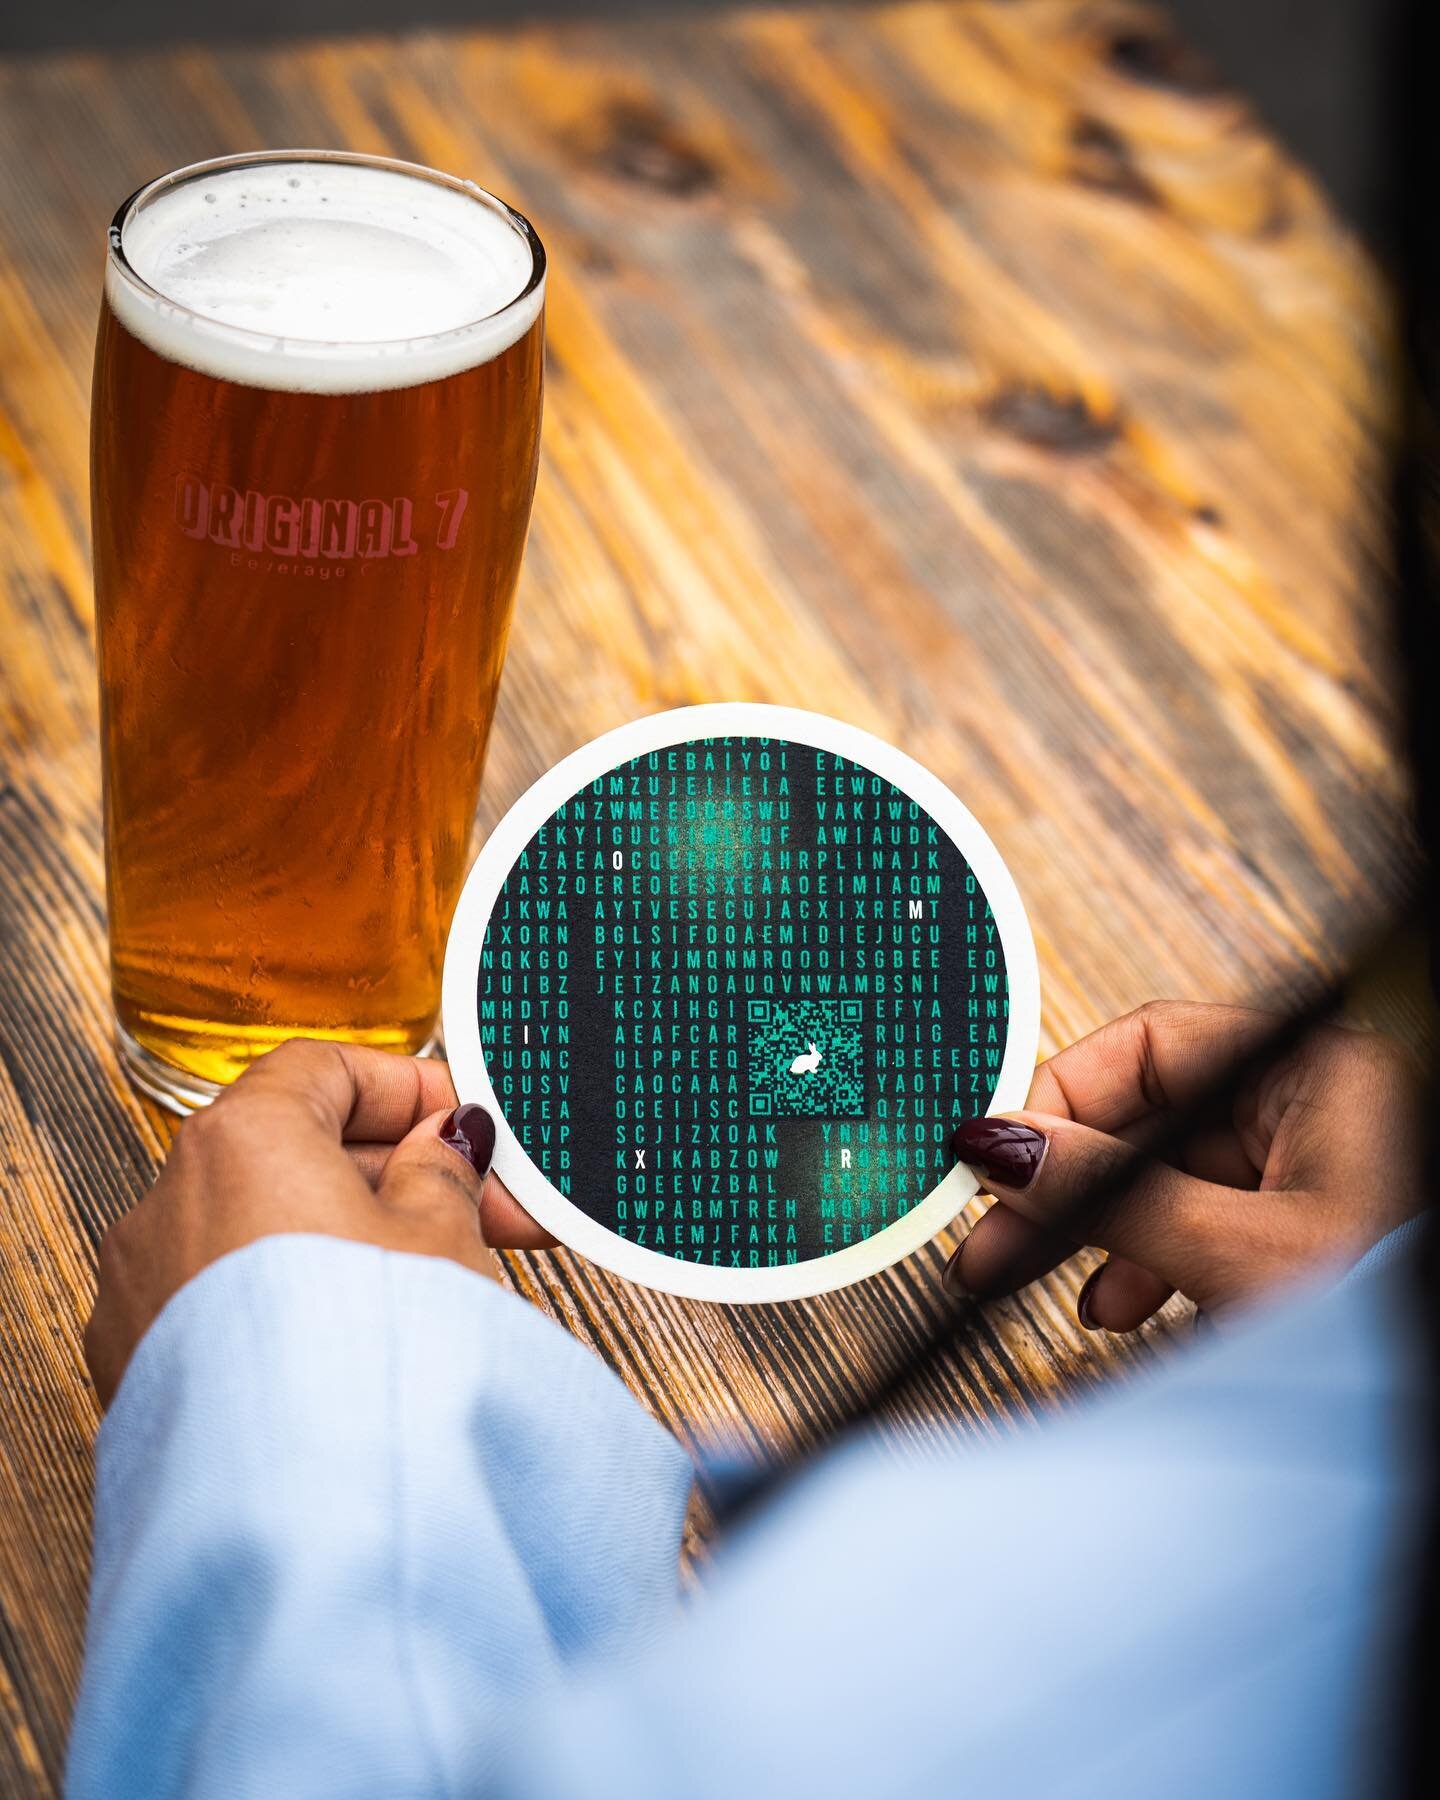 Find the 90&rsquo;s movie name in the Matrix Code on our 7 different beer mats scattered across all of our participating bars in Cork City. Crack all 7 and win a trip to Wonderland (Or Original 7 Beverage Co Merch, Brewery Tours and Bar Tab!)

Follow